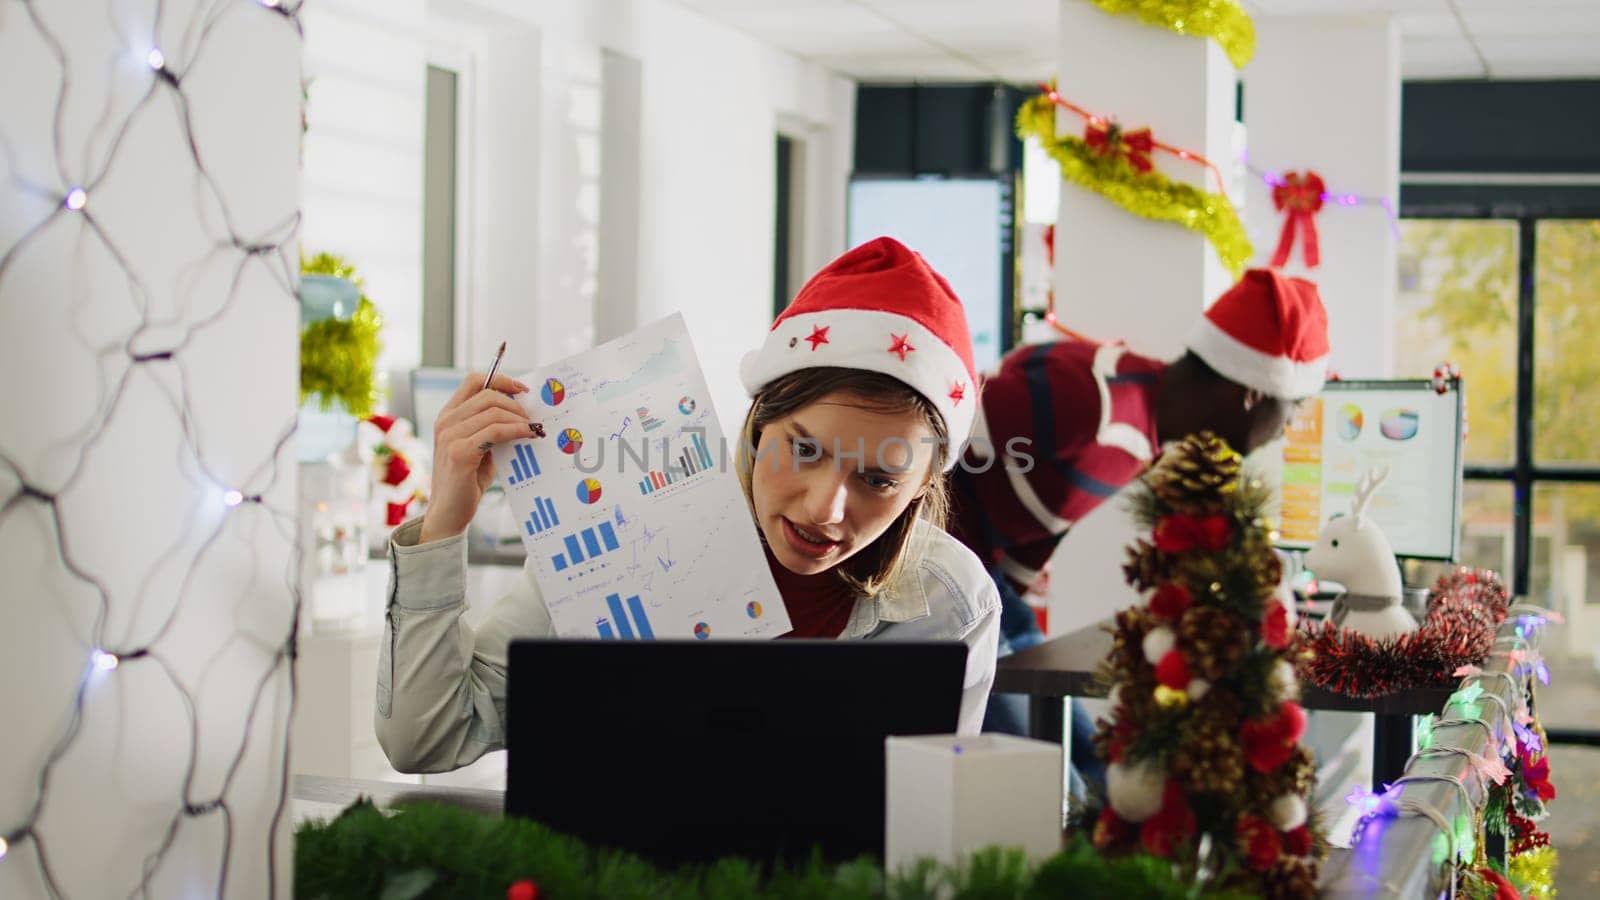 Employee in Christmas decorated office happy to show management positive company profit during videocall. Worker in teleconference meeting talking with managers during xmas holiday season